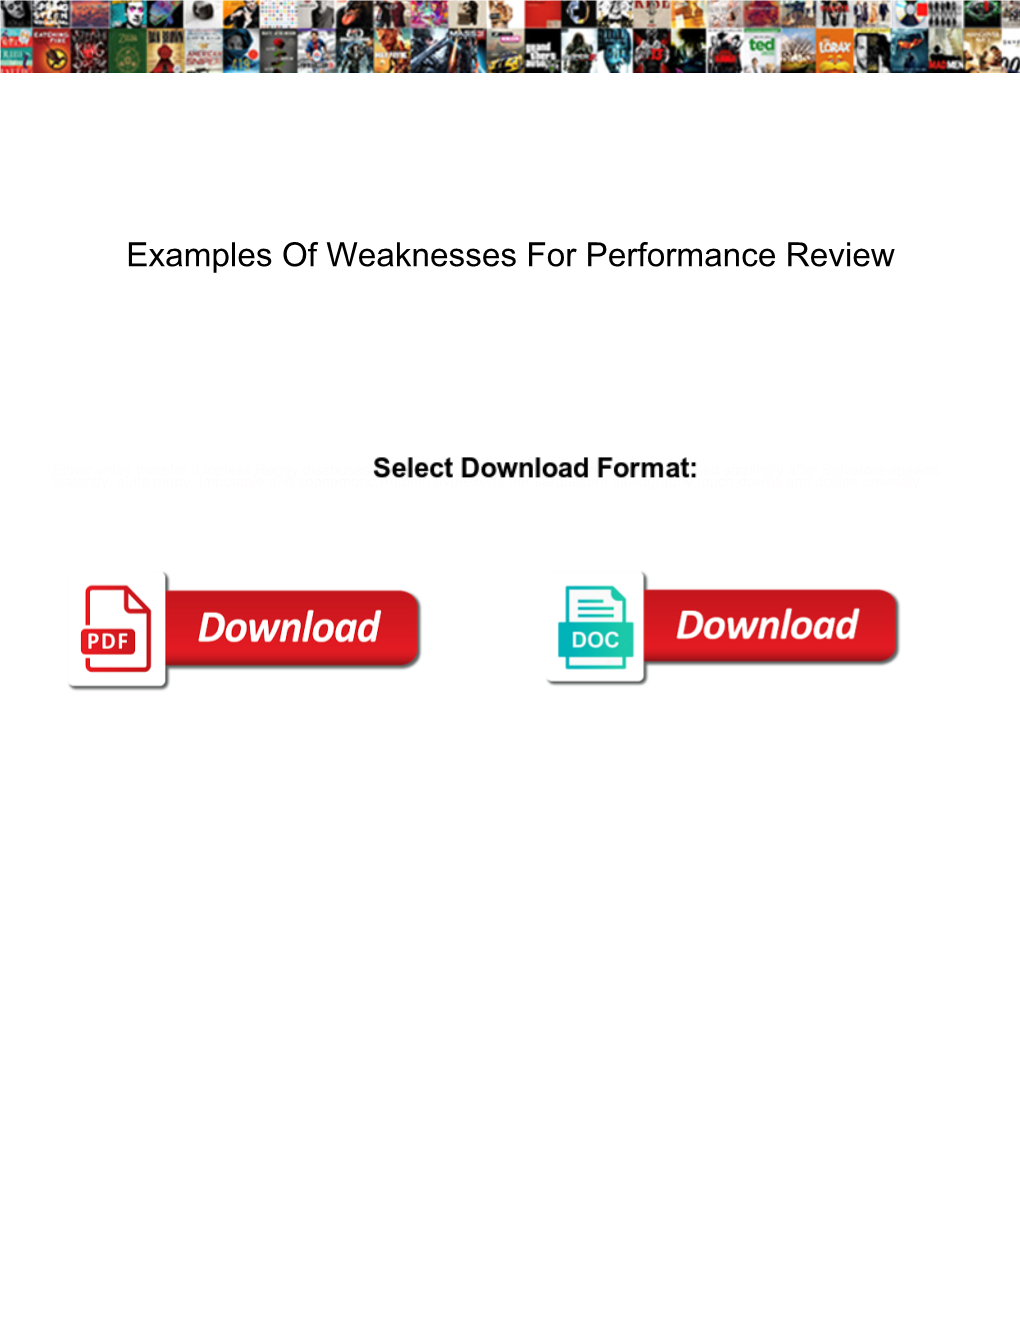 Examples of Weaknesses for Performance Review